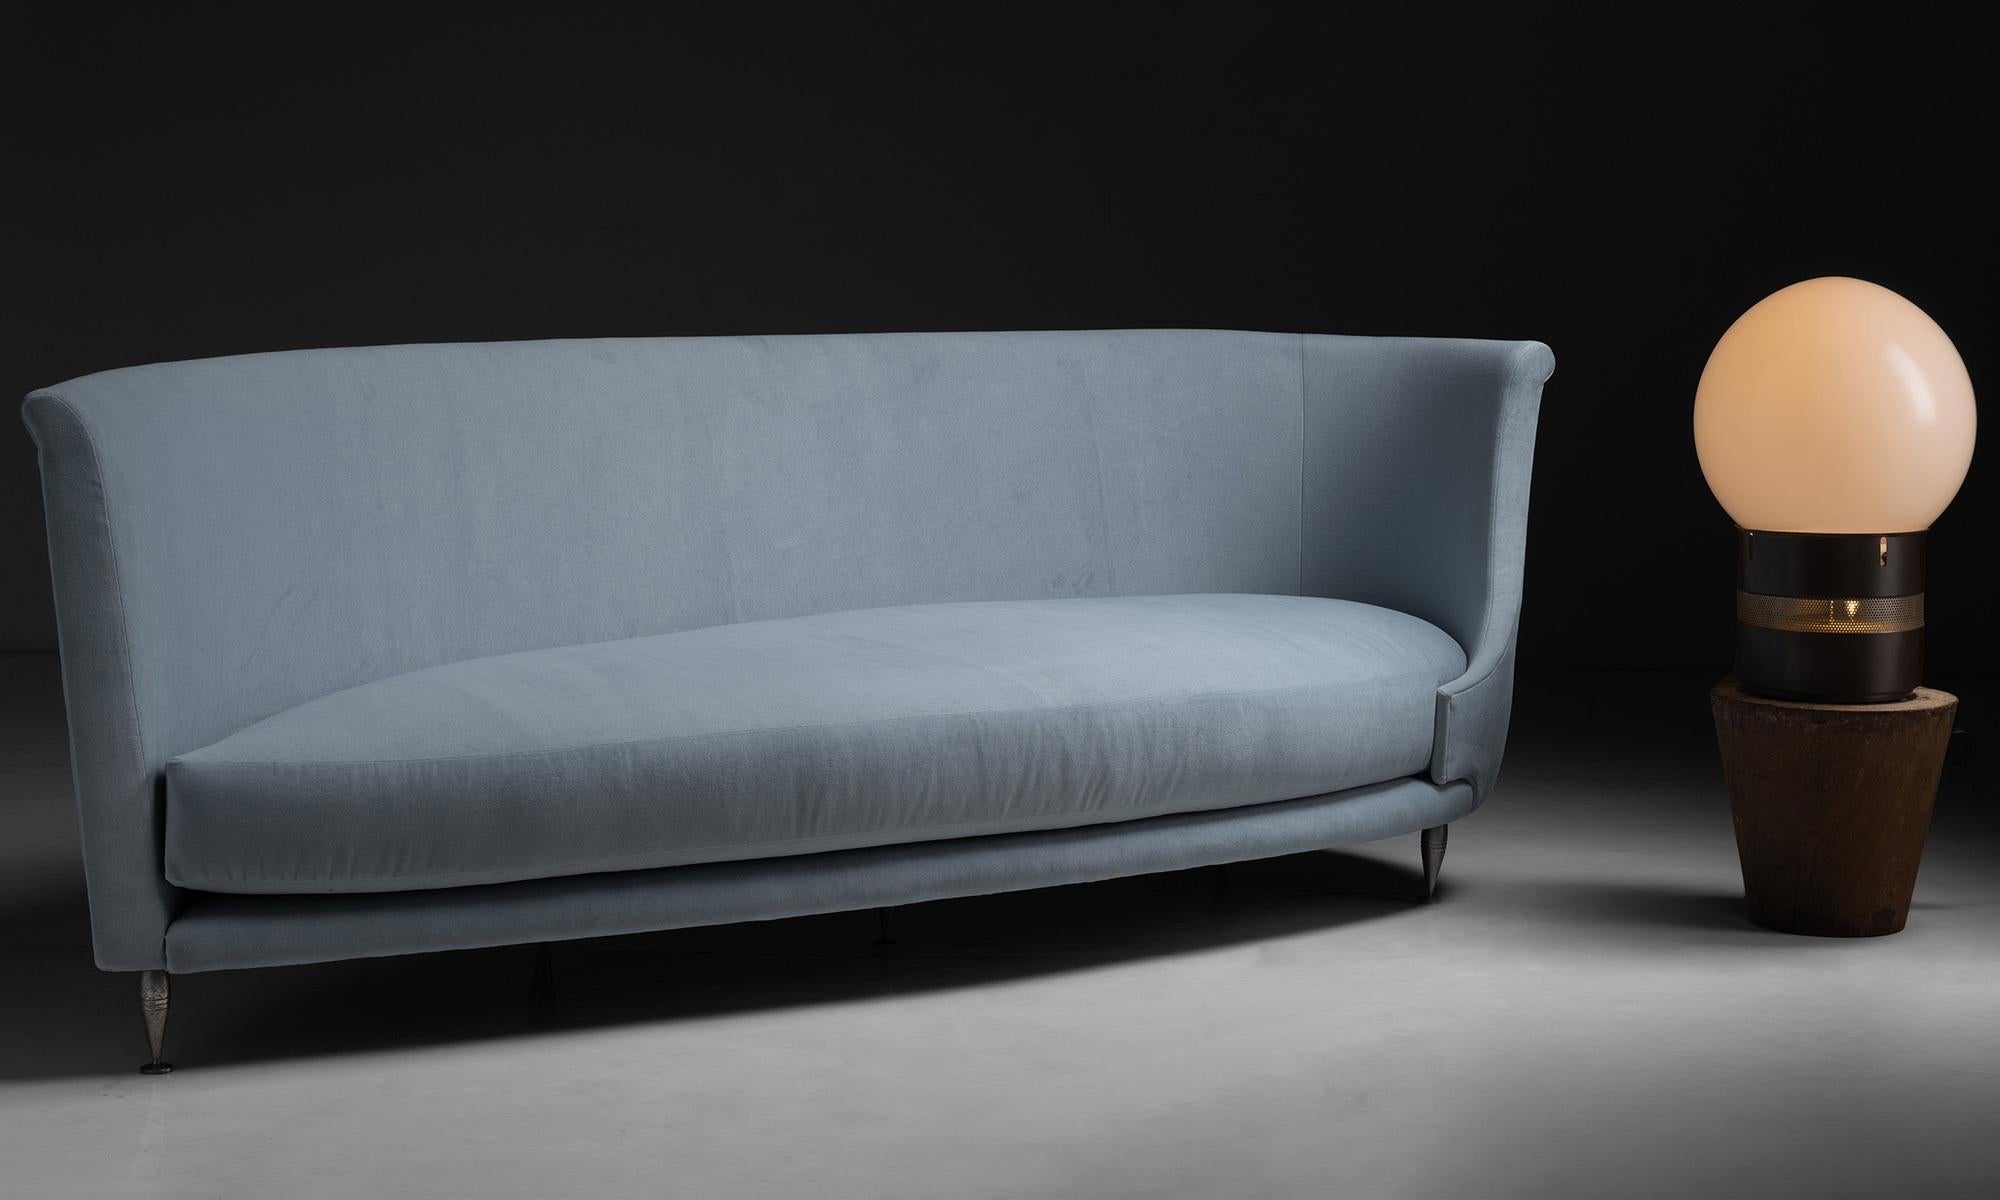 Asymmetrical sofa by Massimo Iosa Ghini

Italy circa 1989

Newly upholstered in 100% virgin wool by Rosemary Hallgarten on original antique frame.

Measures: 113”L x 38”D x 36.5”H x 17”seat